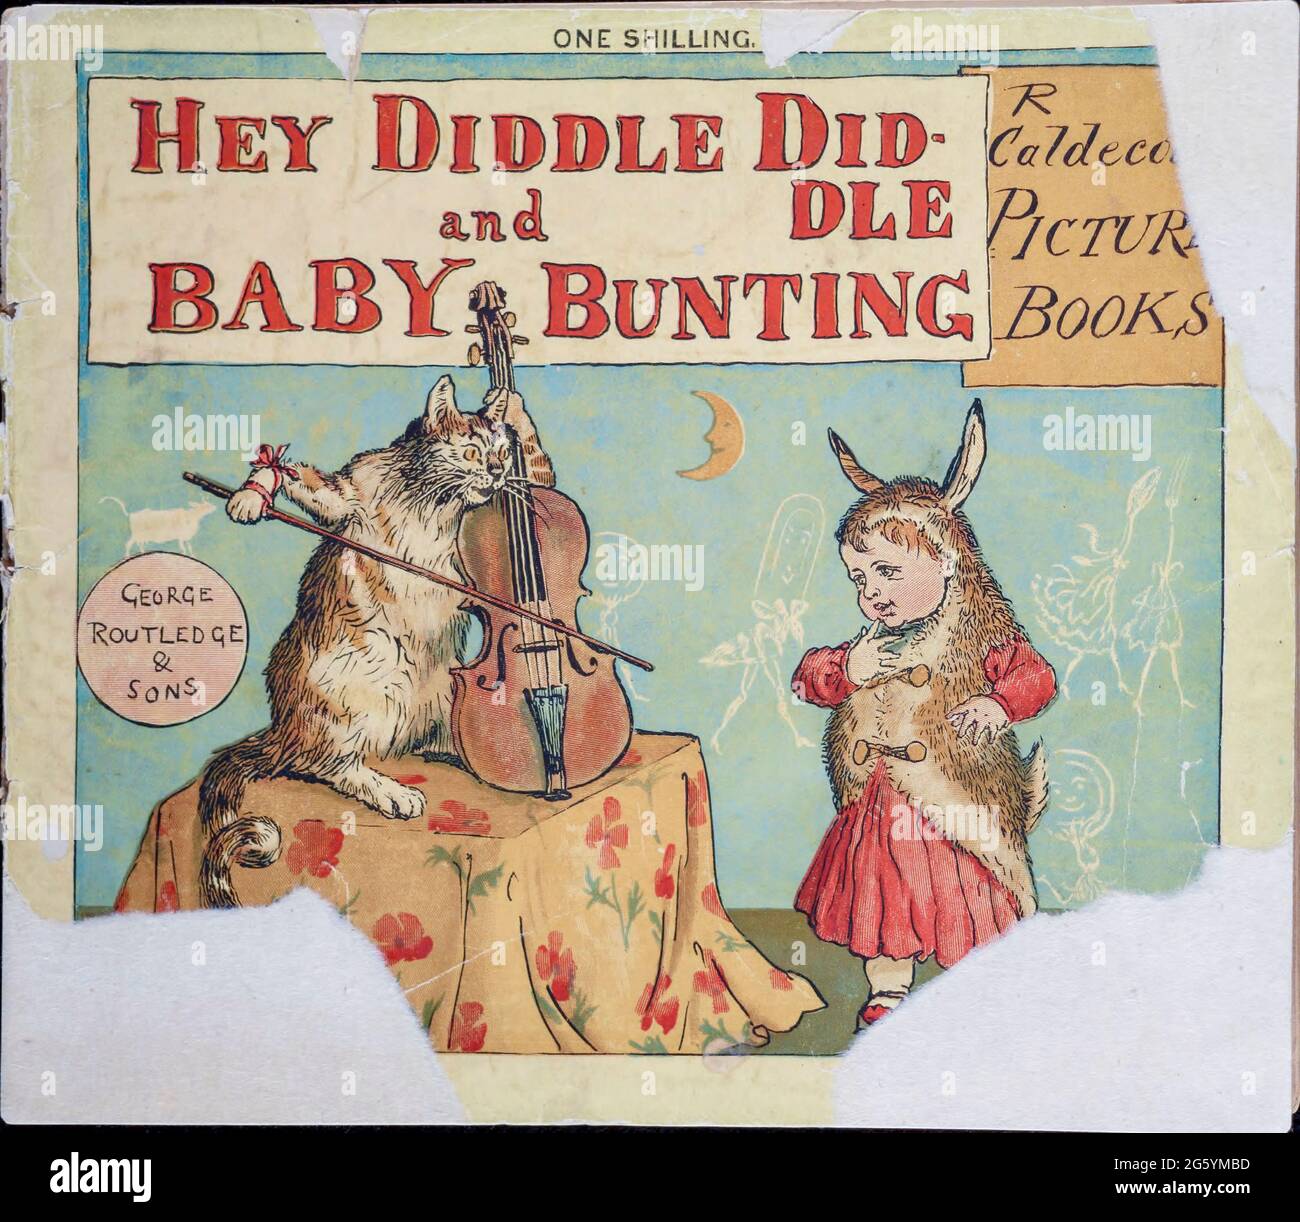 Front cover of from the book  ' Hey diddle diddle and Baby bunting ' by Randolph Caldecott, Published in London by George Routledge & Sons in 1882 Stock Photo